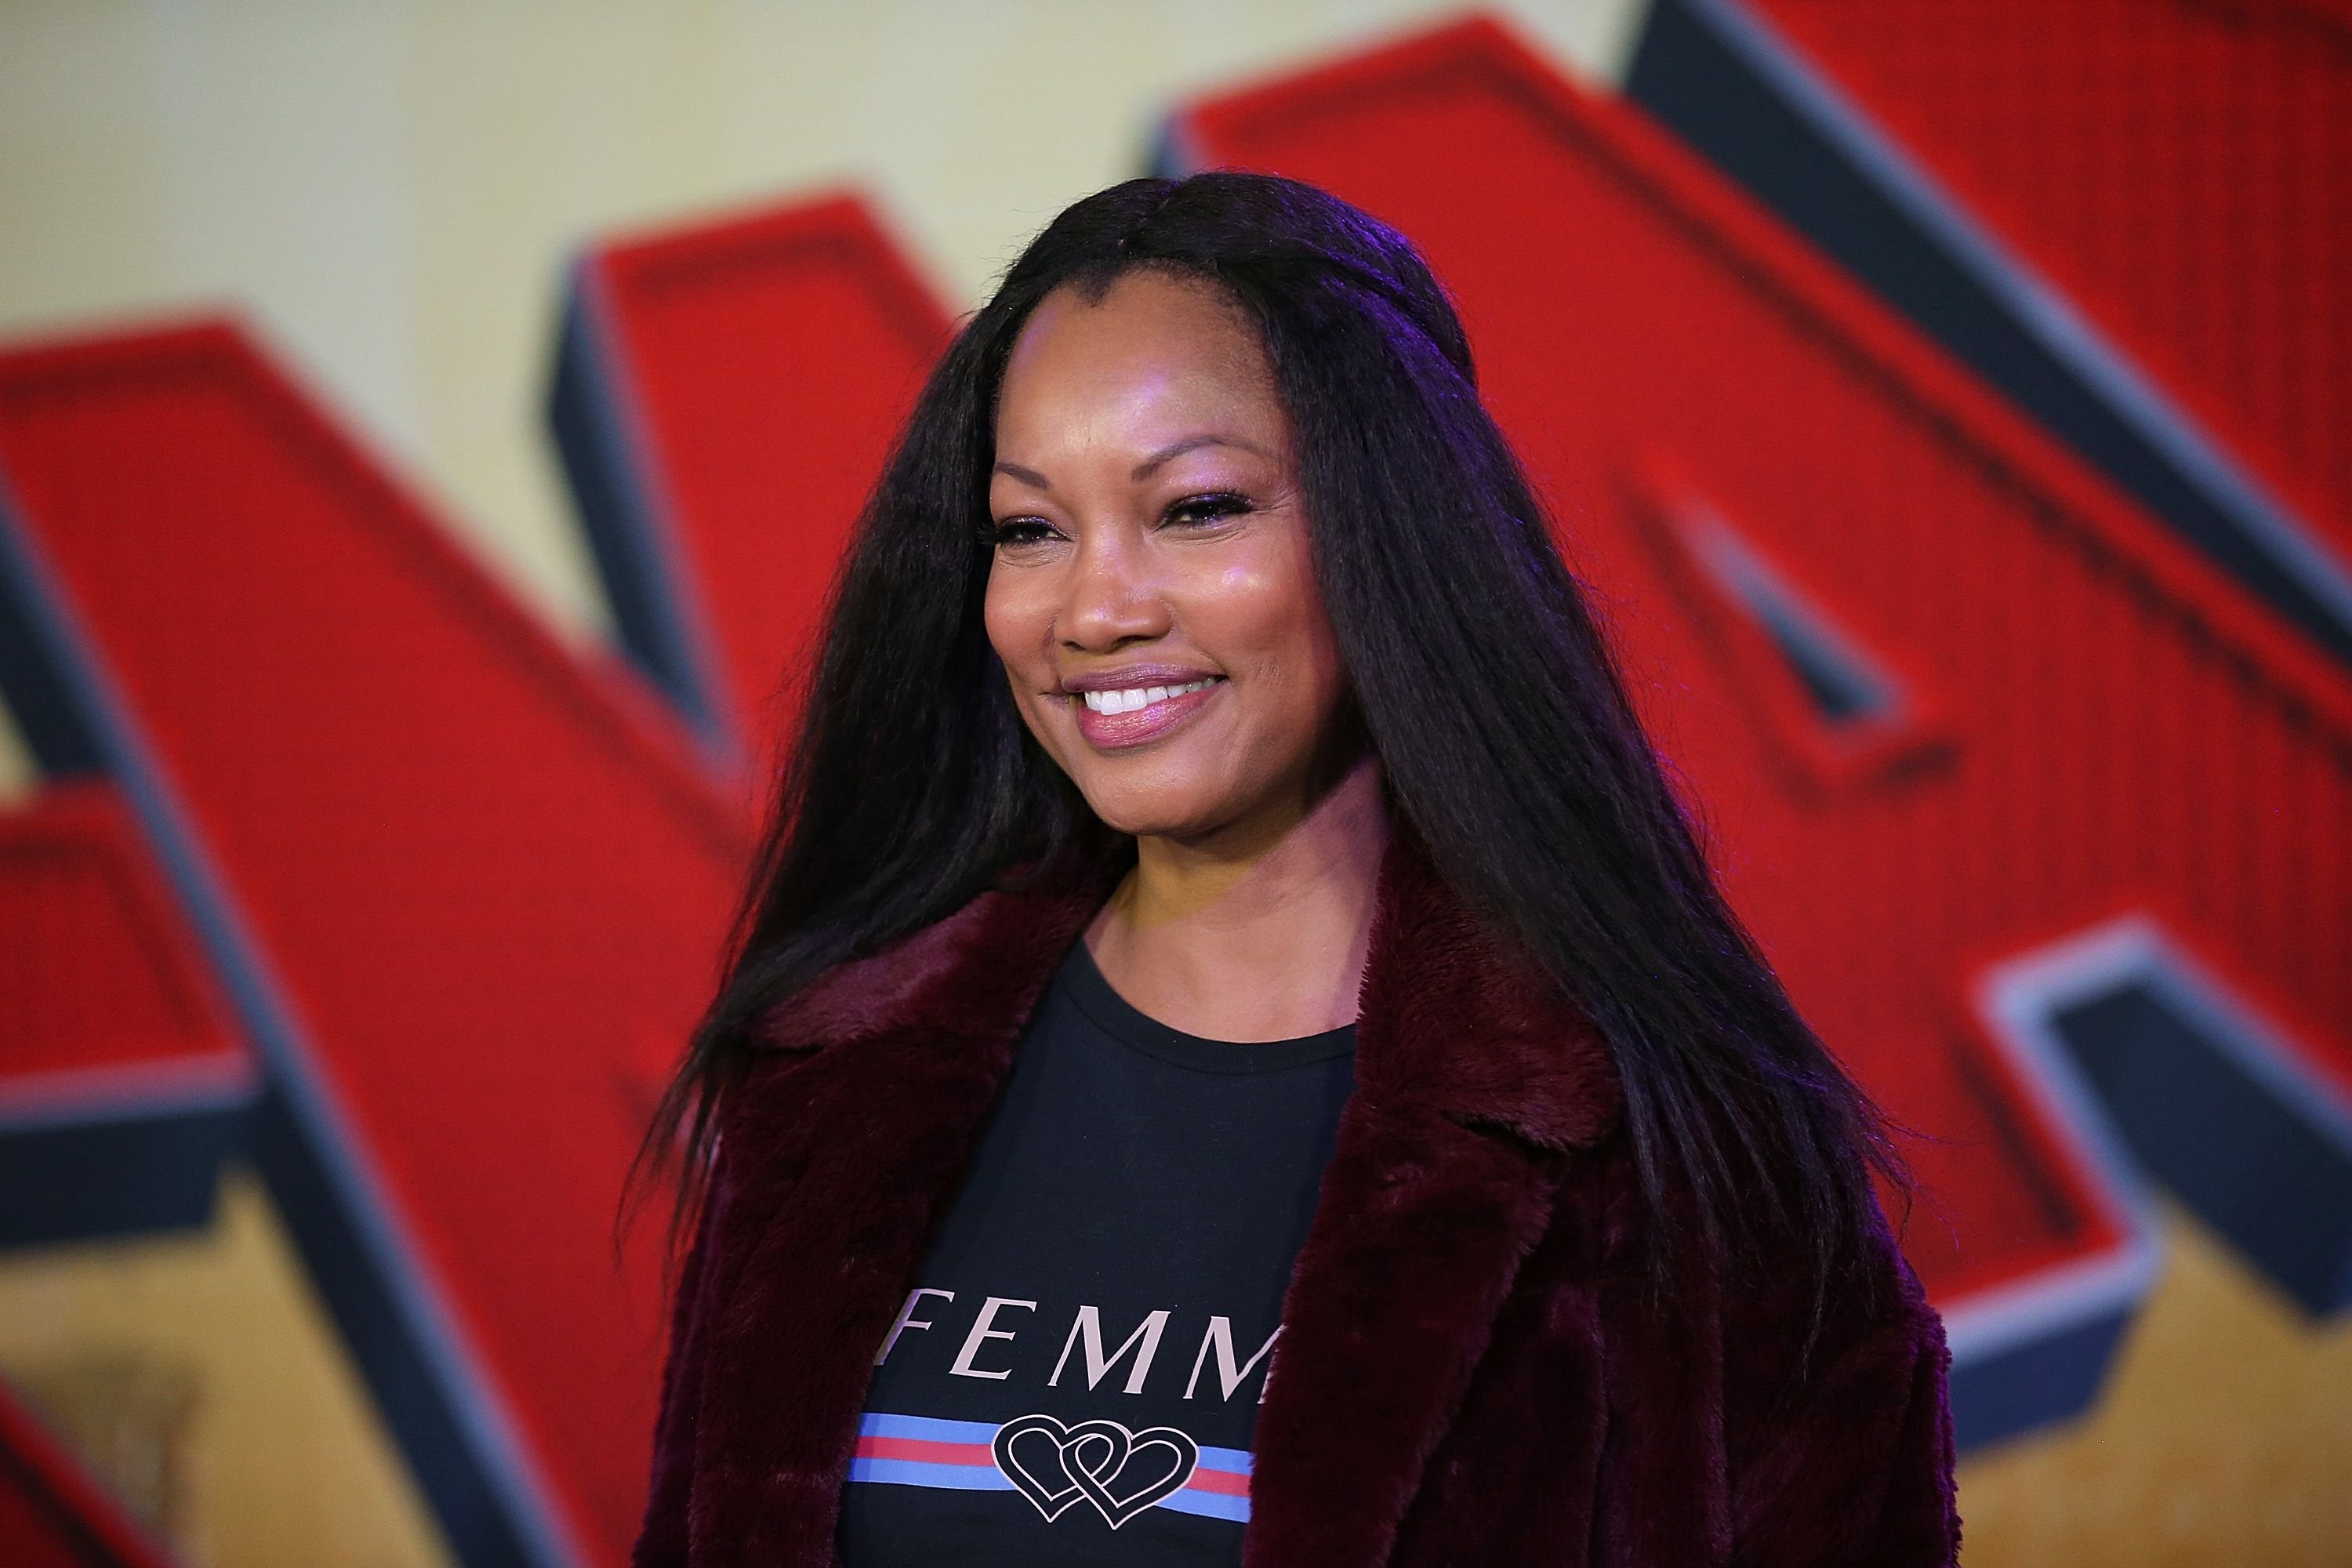 Garcelle Beauvais attends the world premiere of "Spider-Man: Into The Spider-Verse" at Regency Village Theatre on December 1, 2018 in Westwood, California. | Source: Getty Images